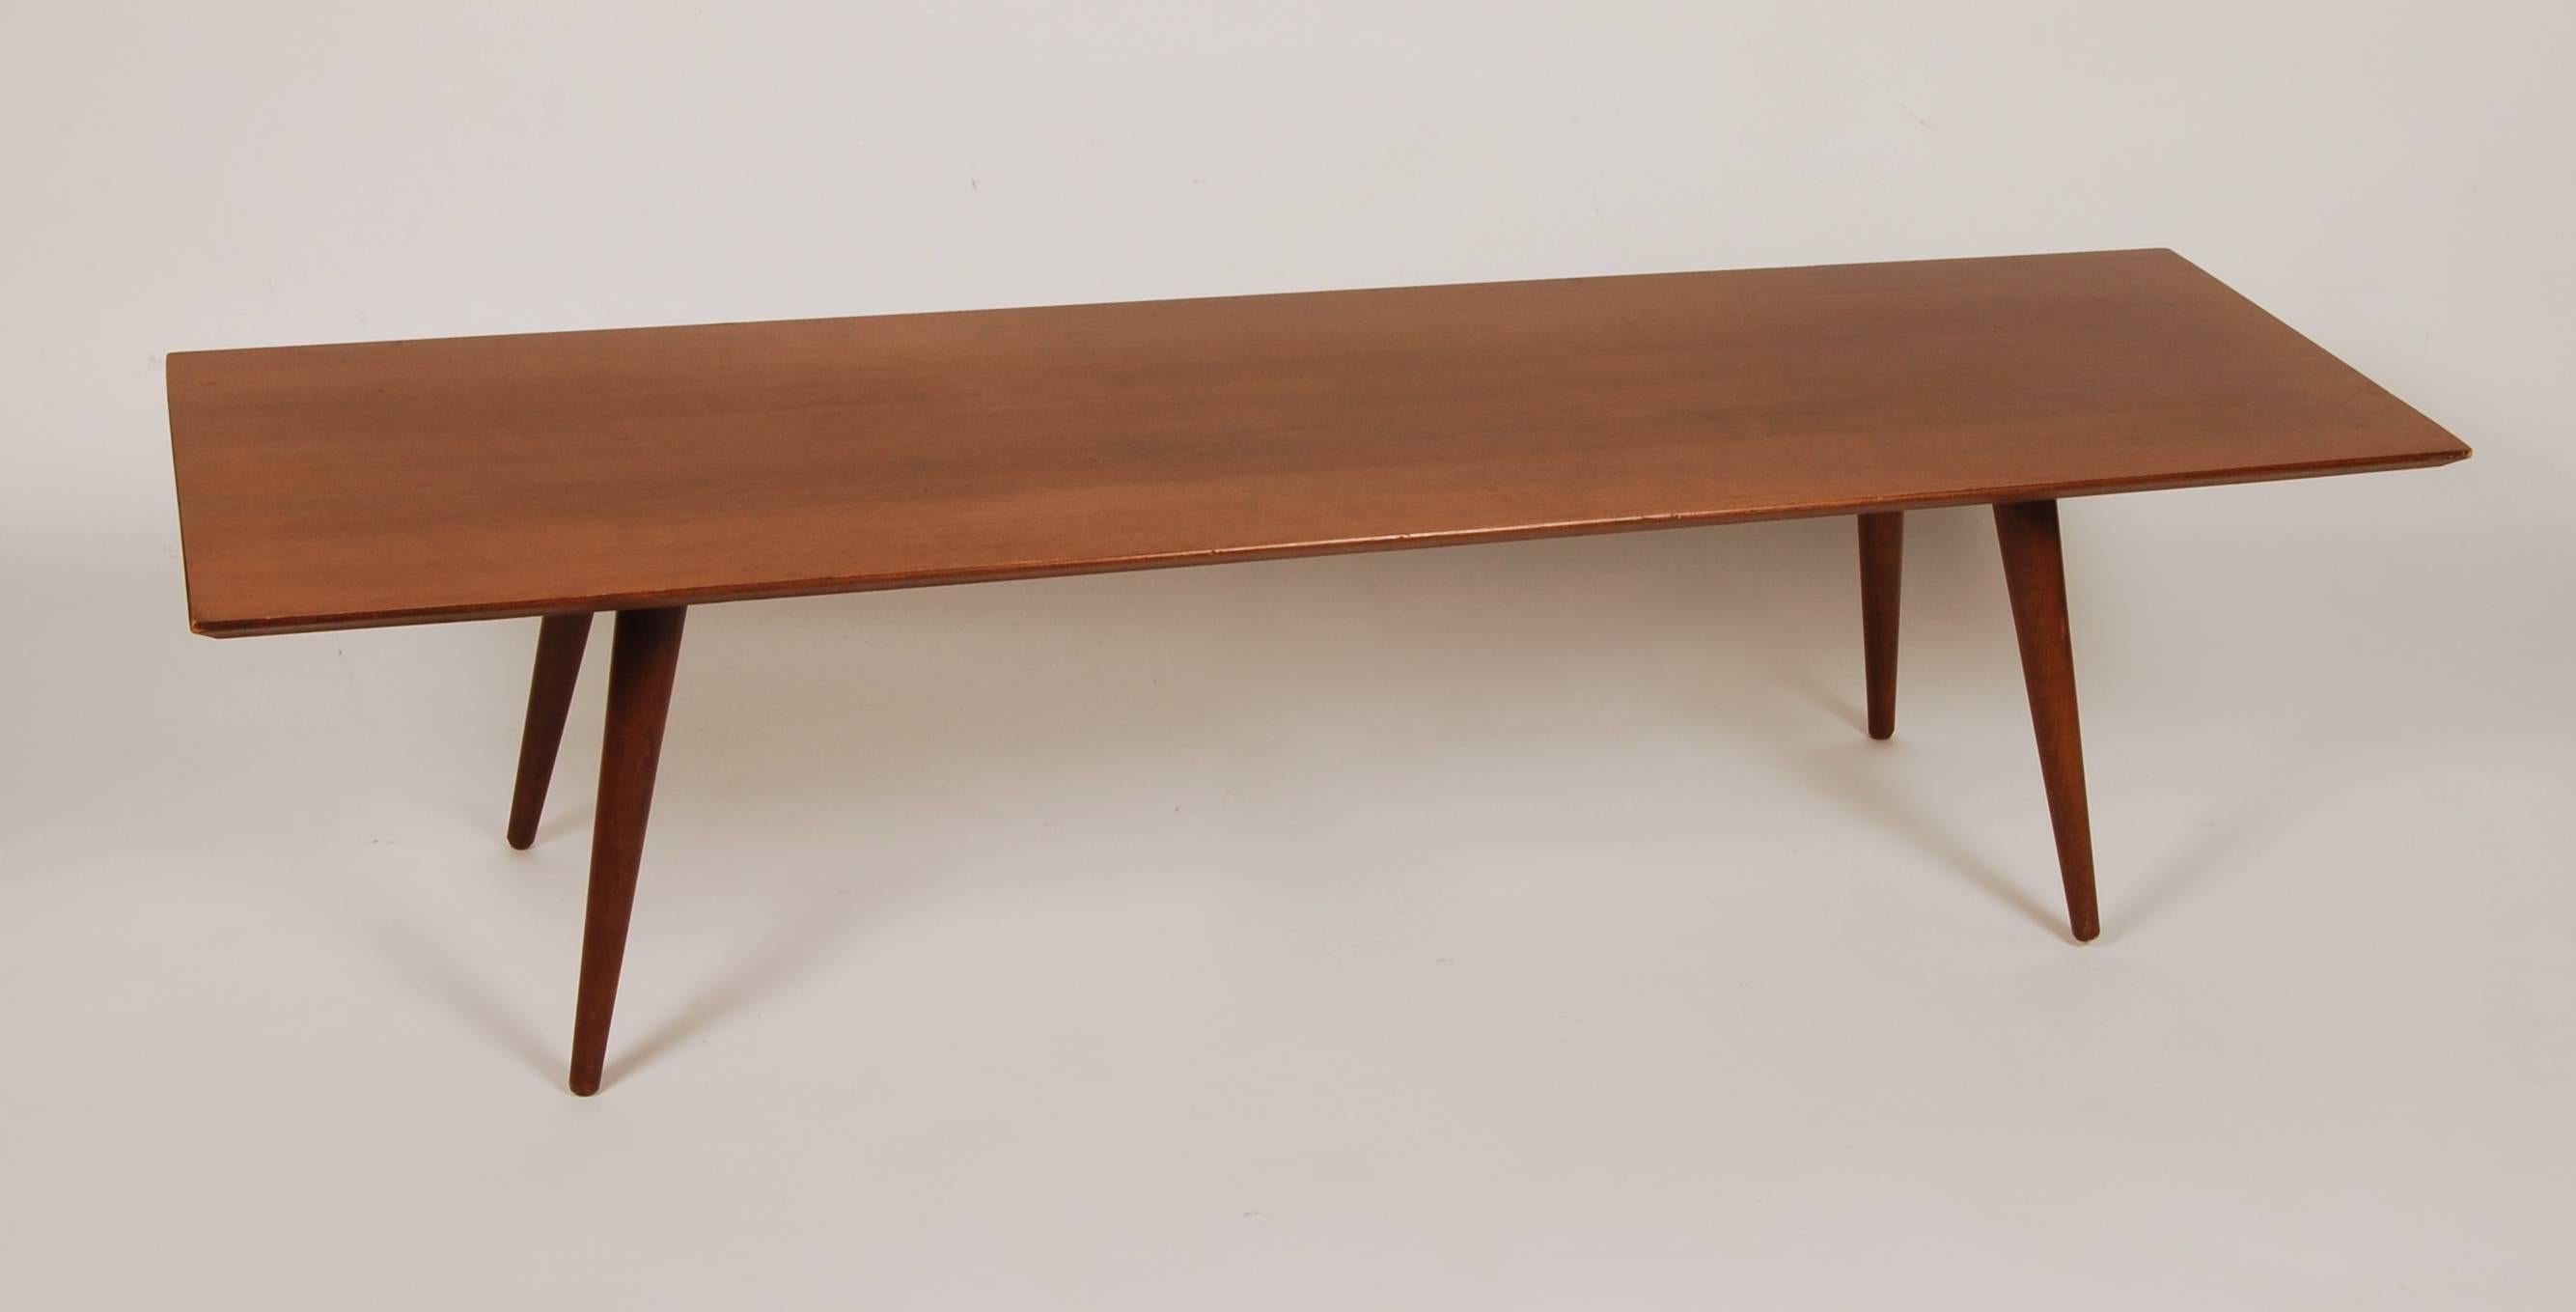 Planner Group coffee table designed by Paul McCobb which was his most well received furniture line during his long career. This example is an all original tobacco stained solid maple construction coffee table or bench with slender tapered legs, foil